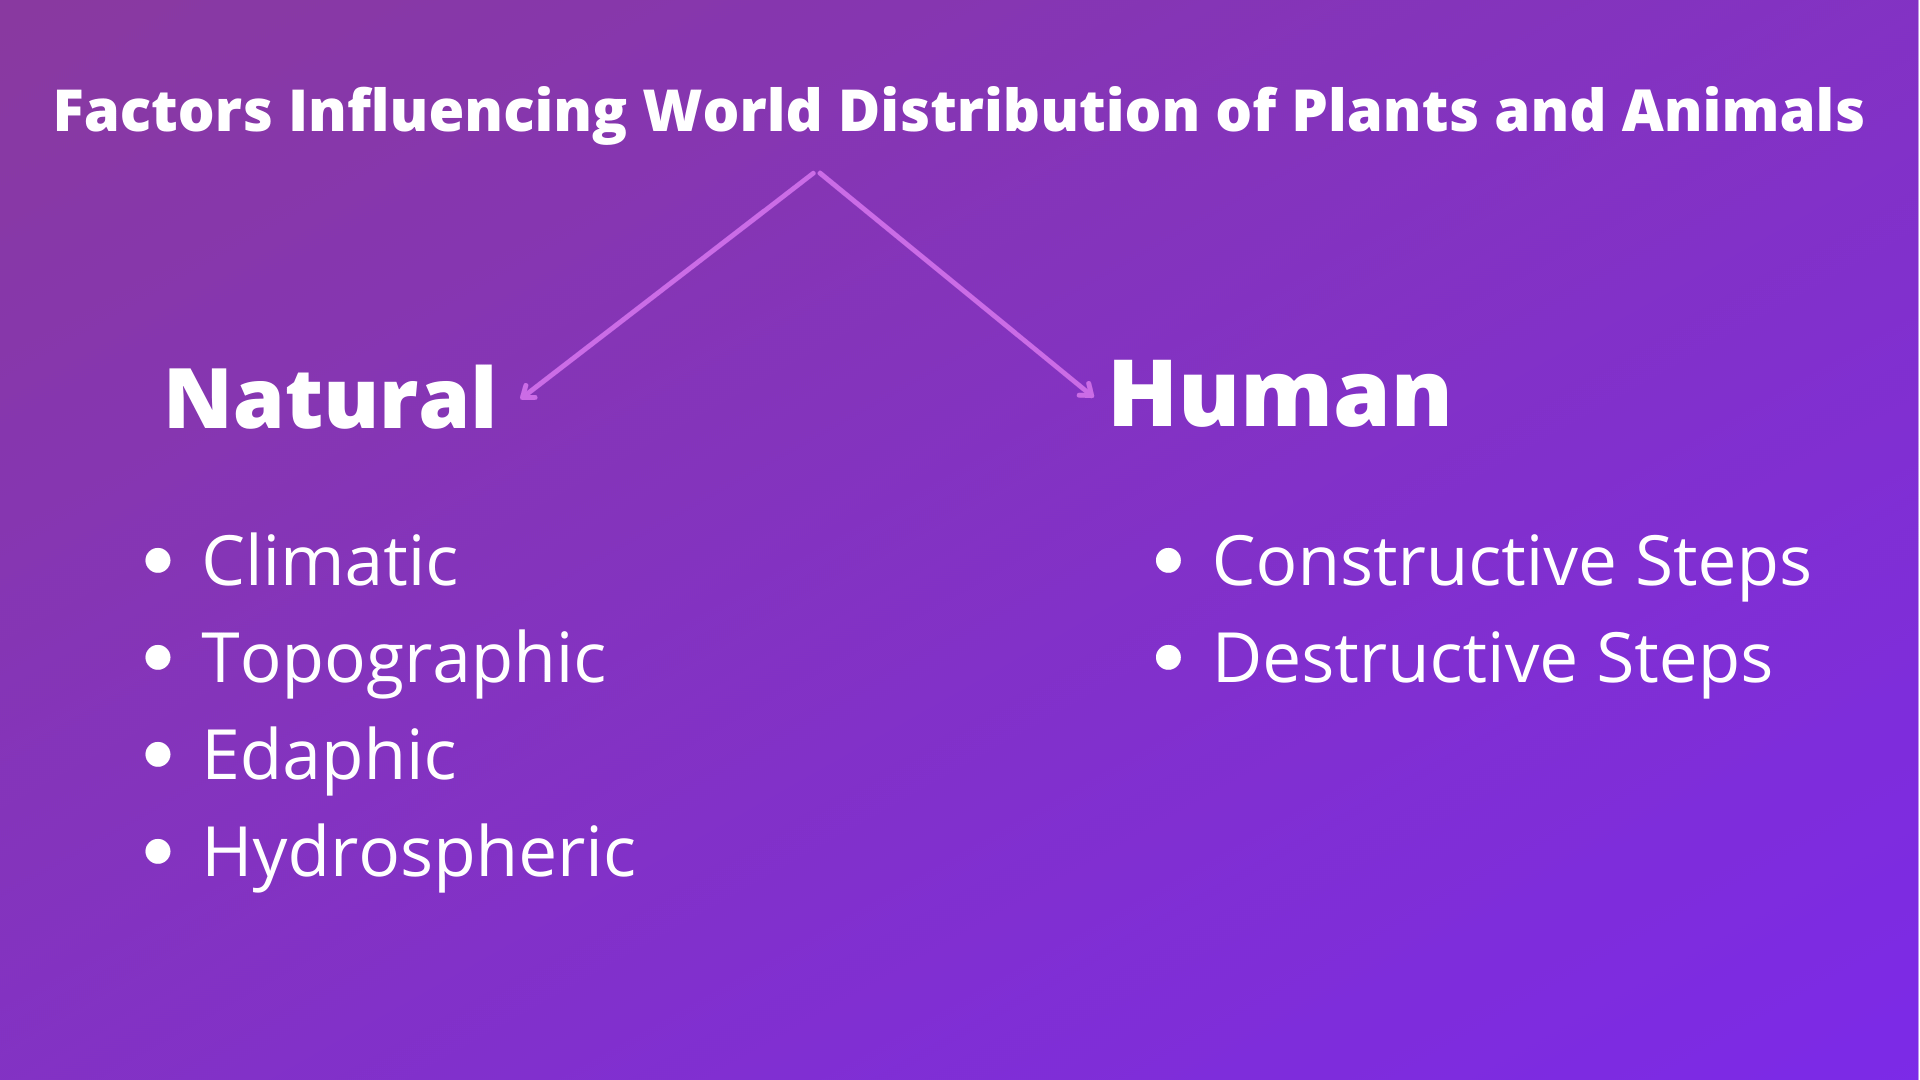 Factors Influencing World Distribution Of Plants And Animals - UPSC